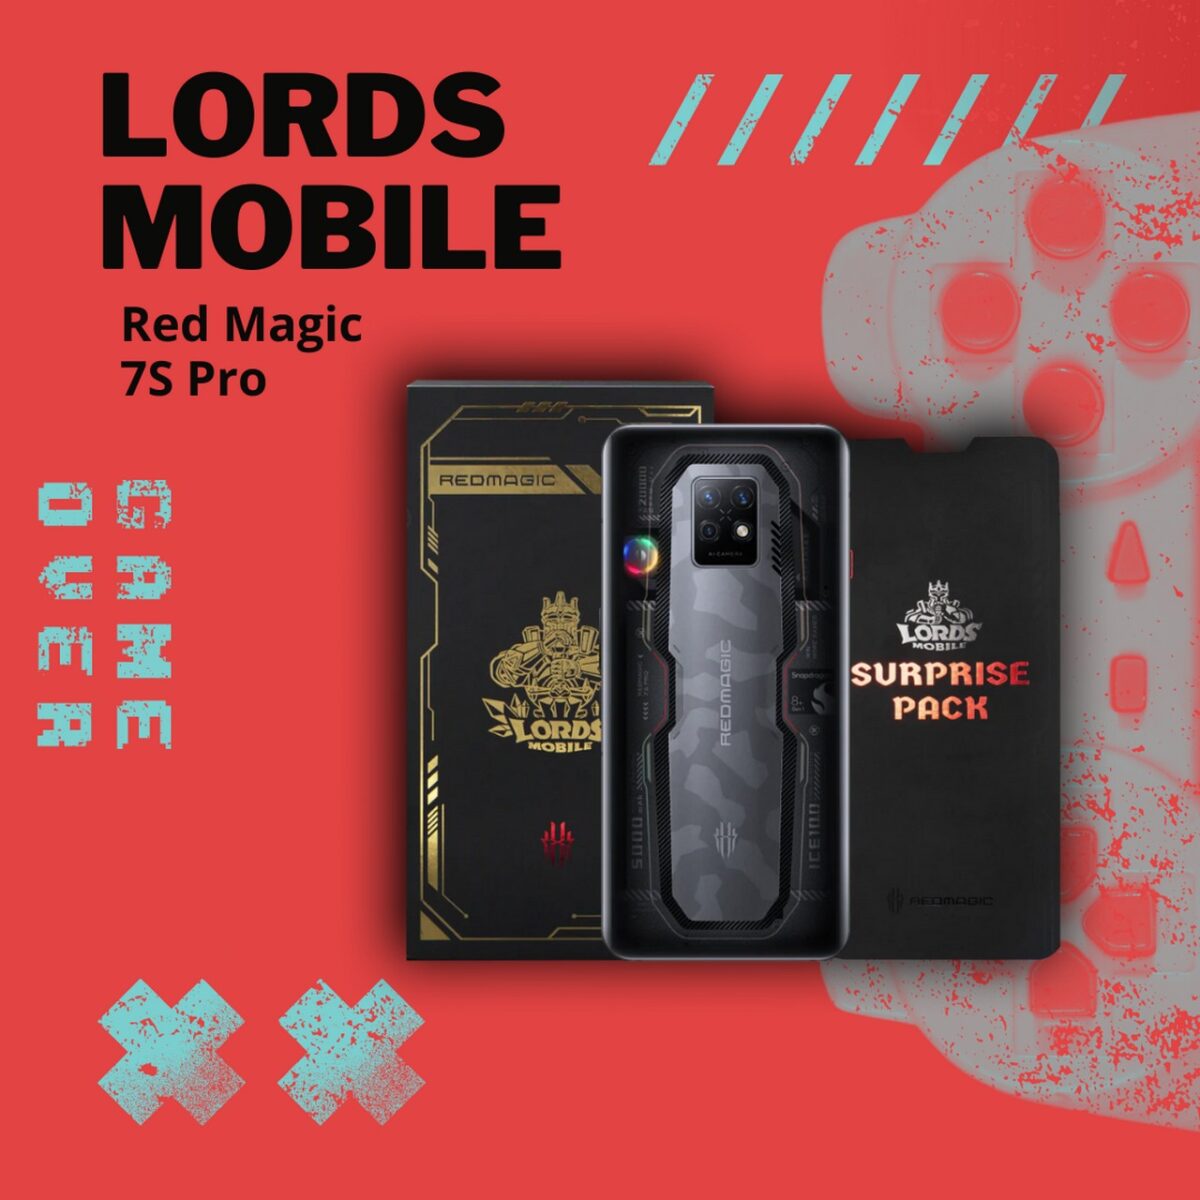 red magic 7s pro lords mobile